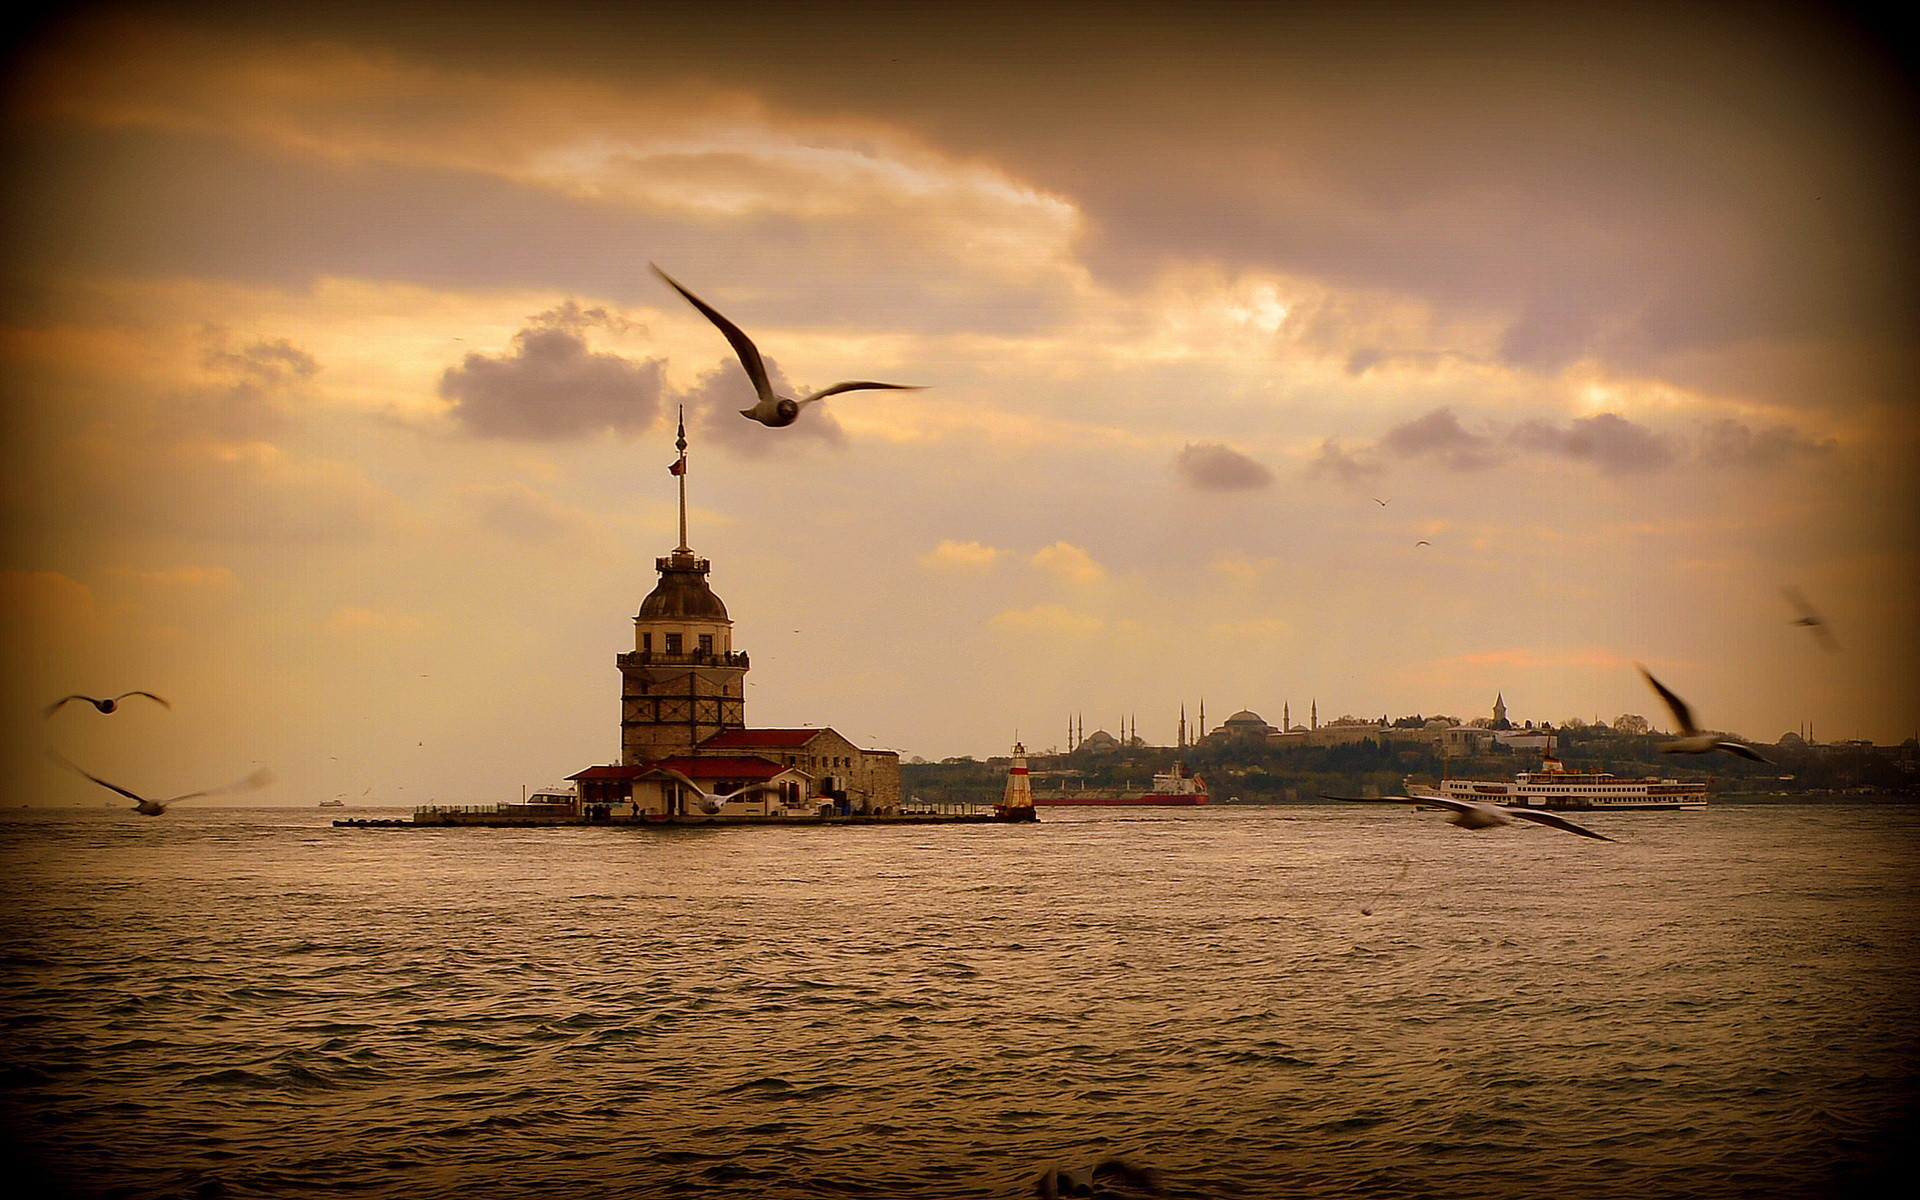 1920x1200, High Definiton Wallpapers In The Nature - Maiden's Tower - HD Wallpaper 